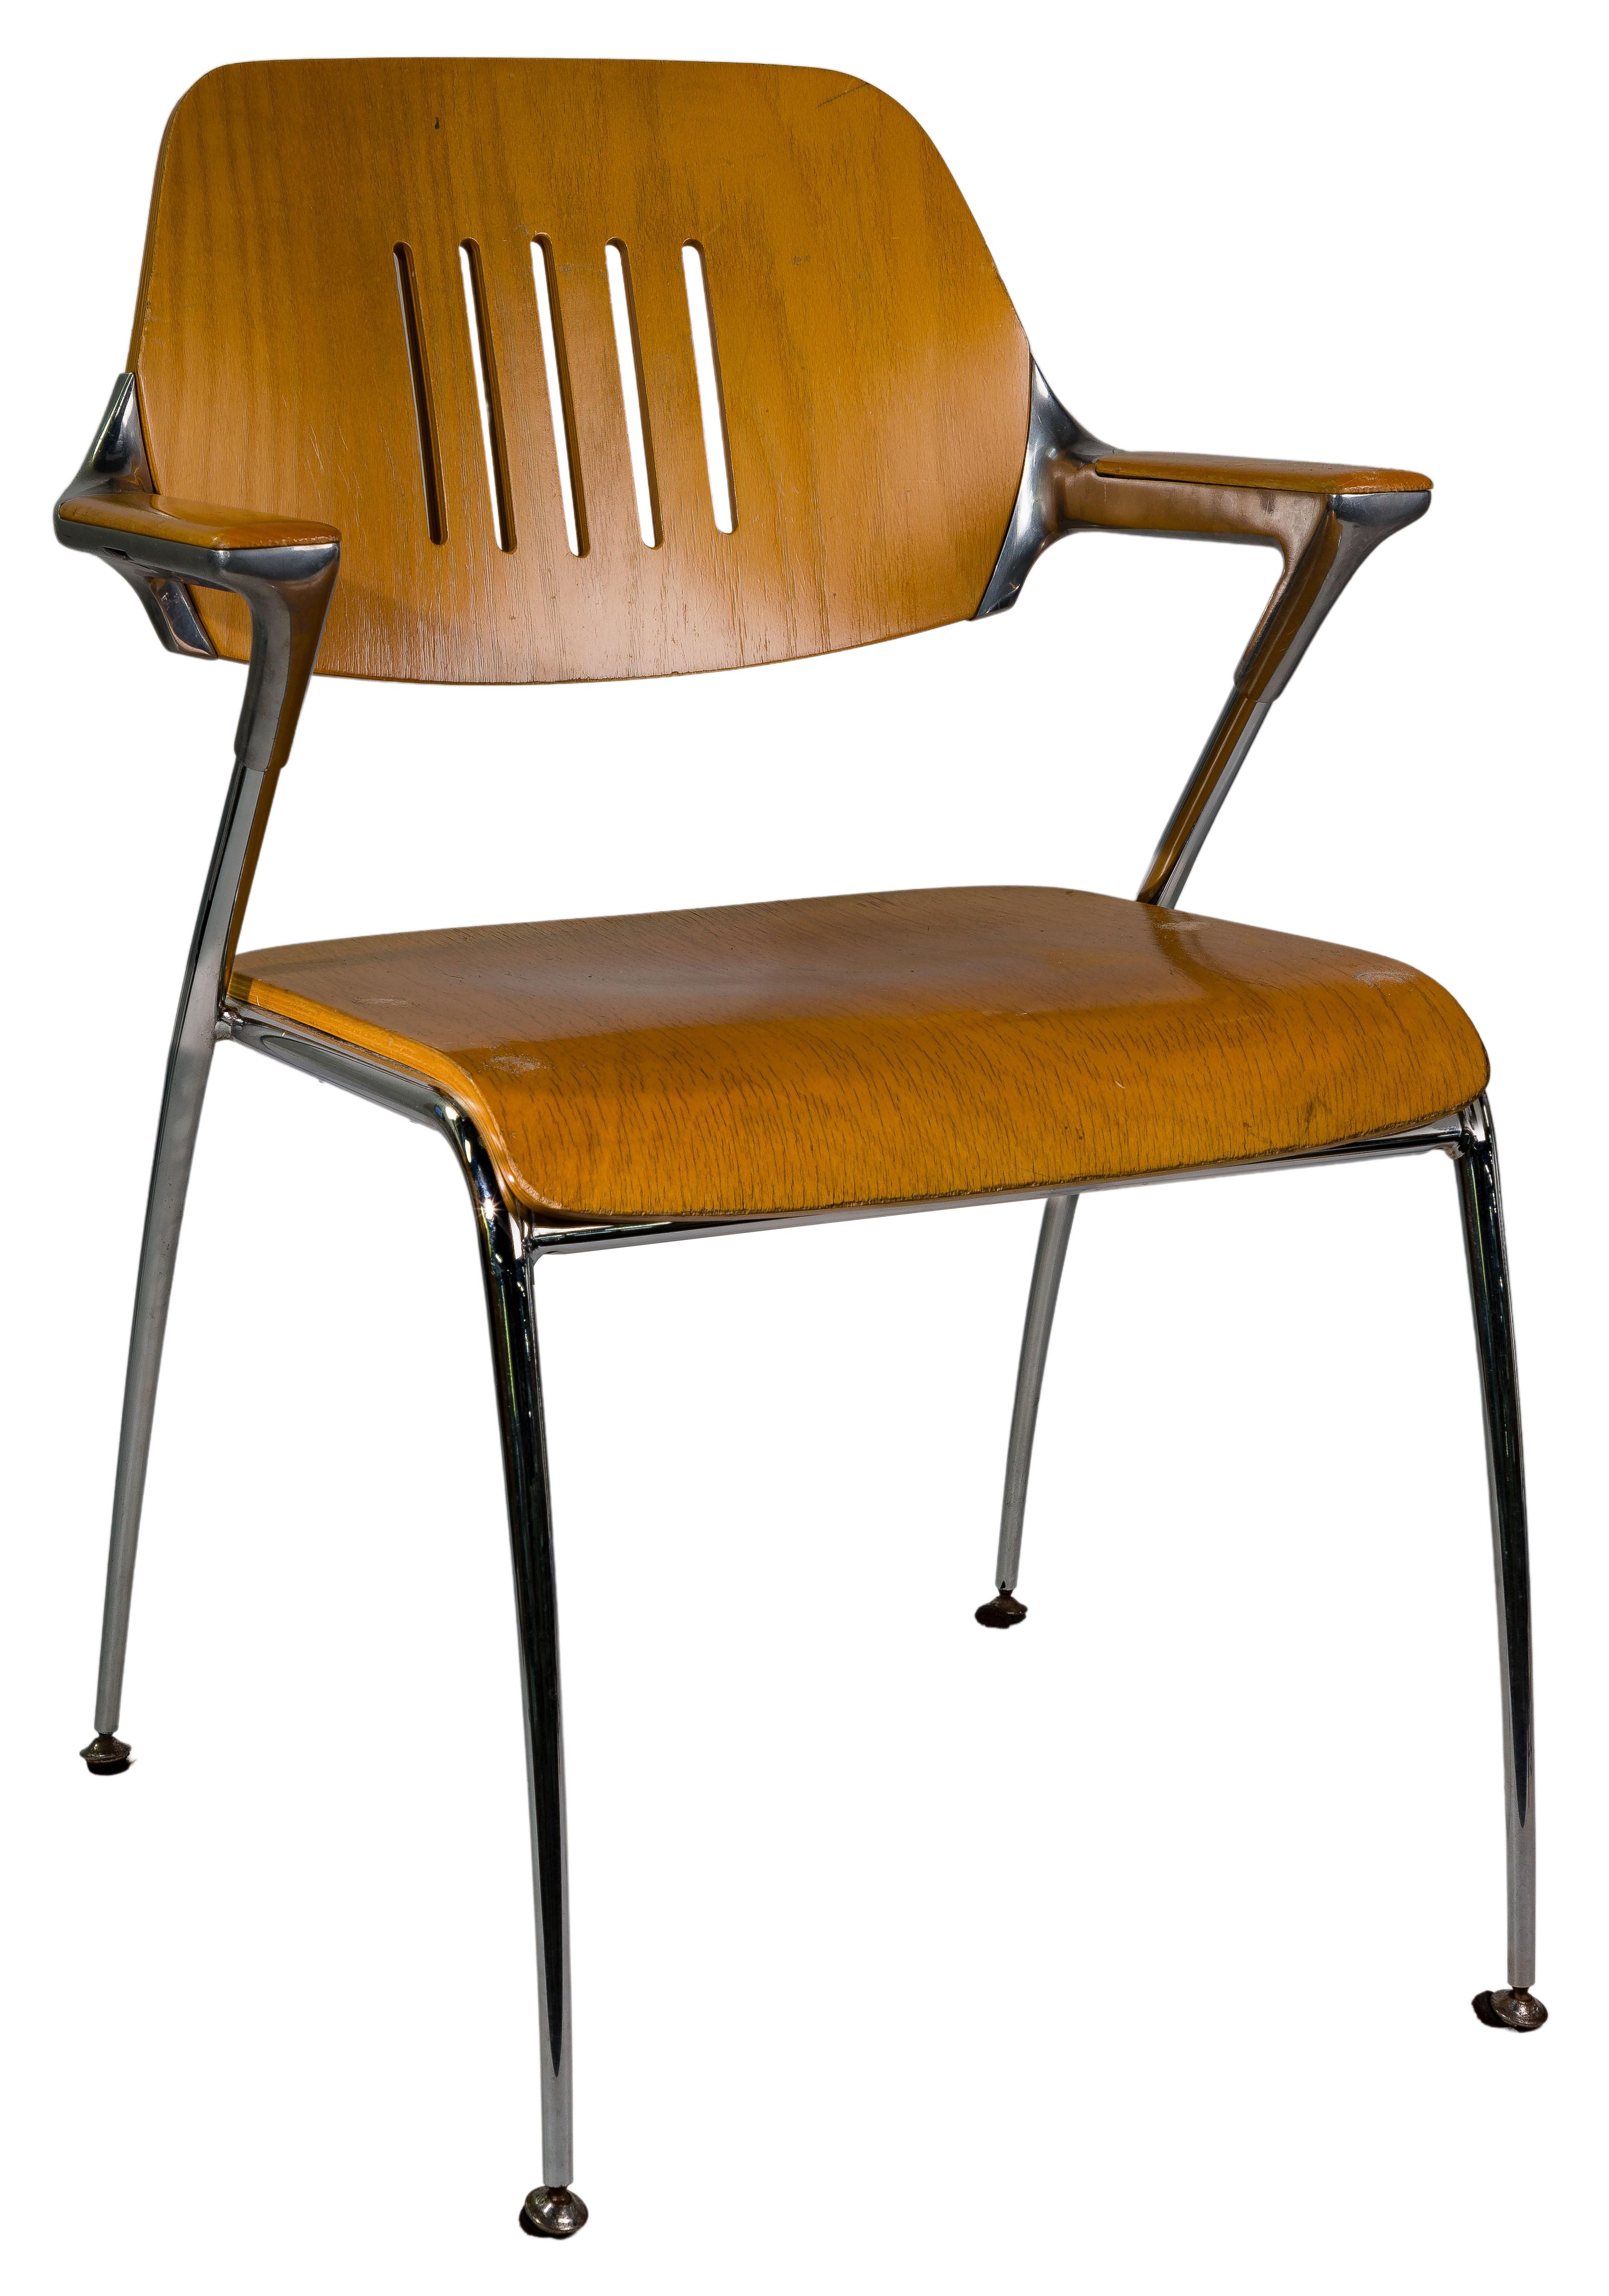 (Attributed to) Francesco Zaccone for Brunner 'Golf' Wood and Metal Chairs